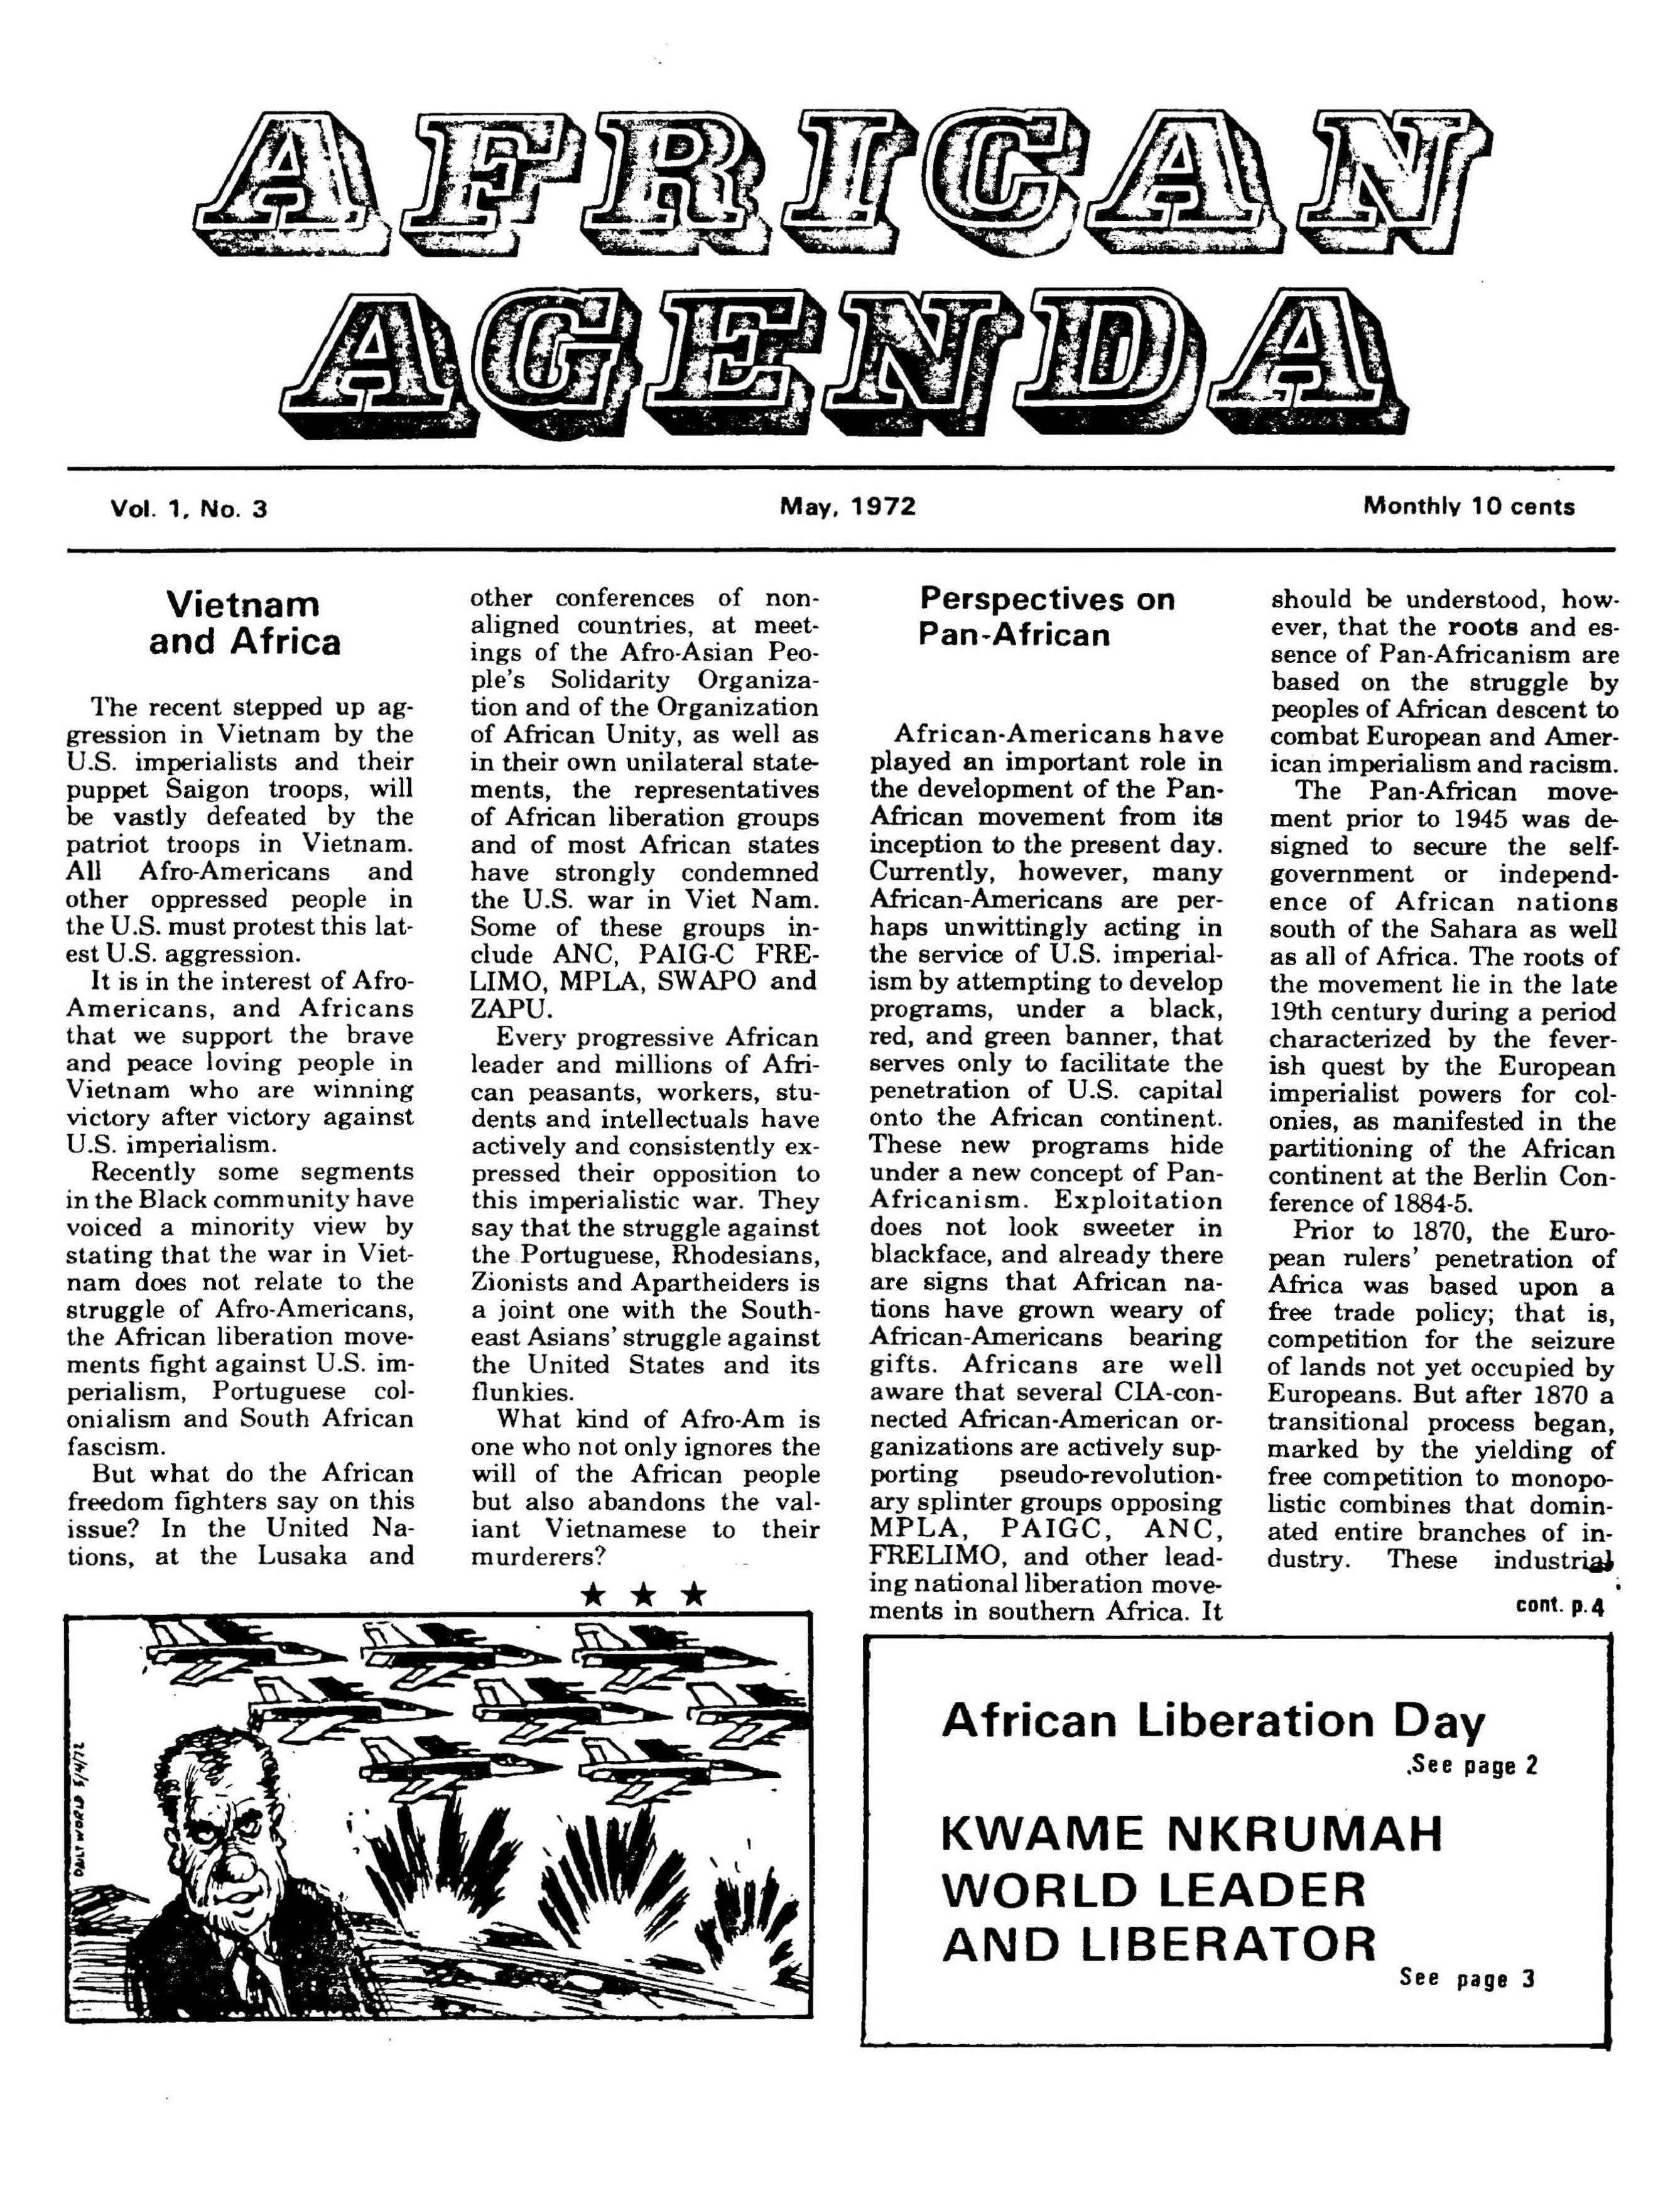 Page 1 of the Newsletter, AFRICAN AGENDA